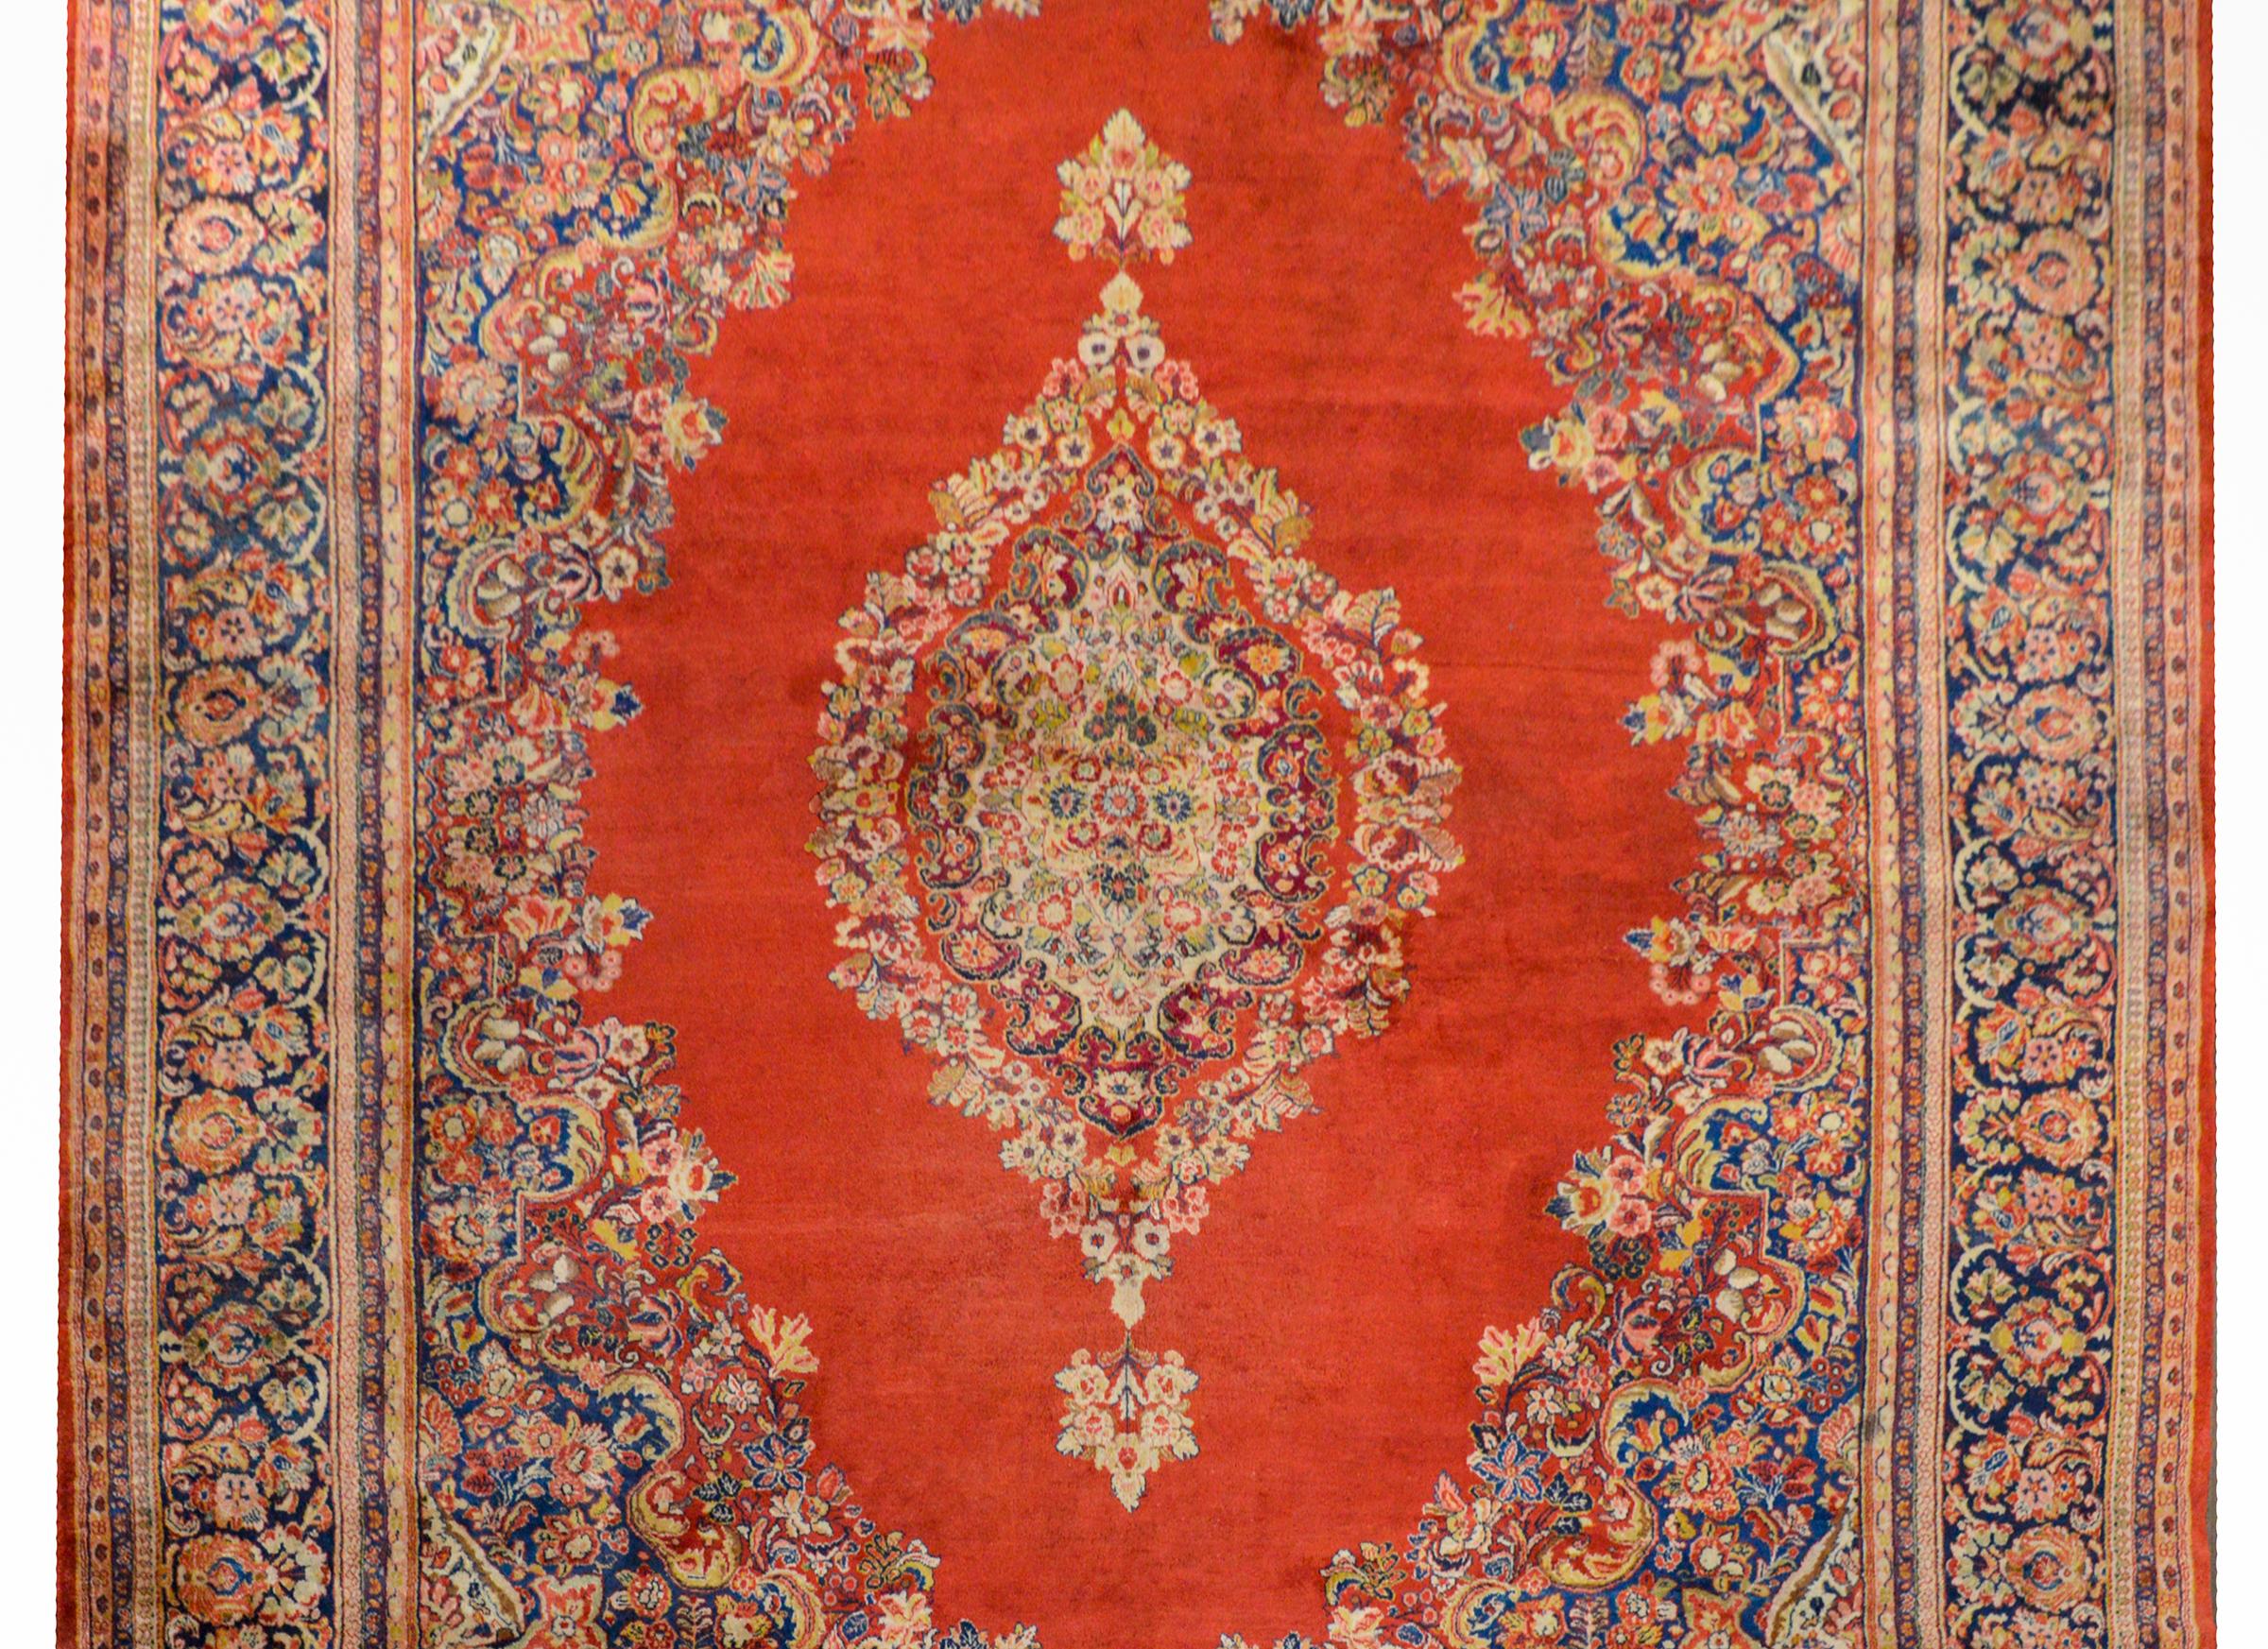 An outstanding monumental early 20th century Persian Sarouk rug with a large floral medallion woven in myriad colors including green, indigo, violet, pink, and cream on a brilliant coral colored background all surrounded by a lush floral border